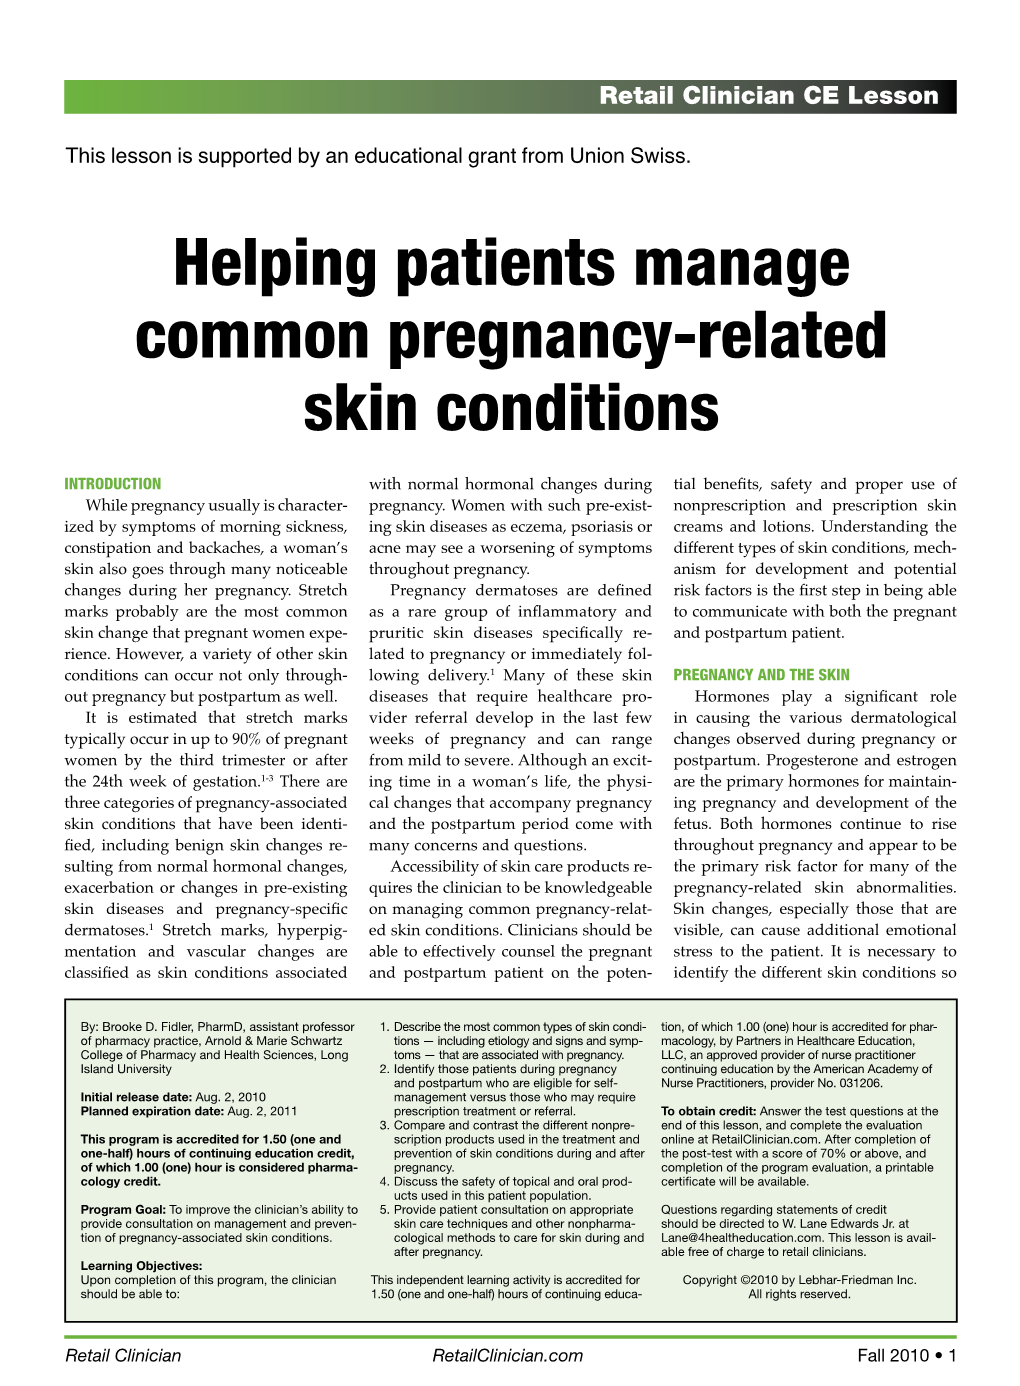 Helping Patients Manage Common Pregnancy-Related Skin Conditions